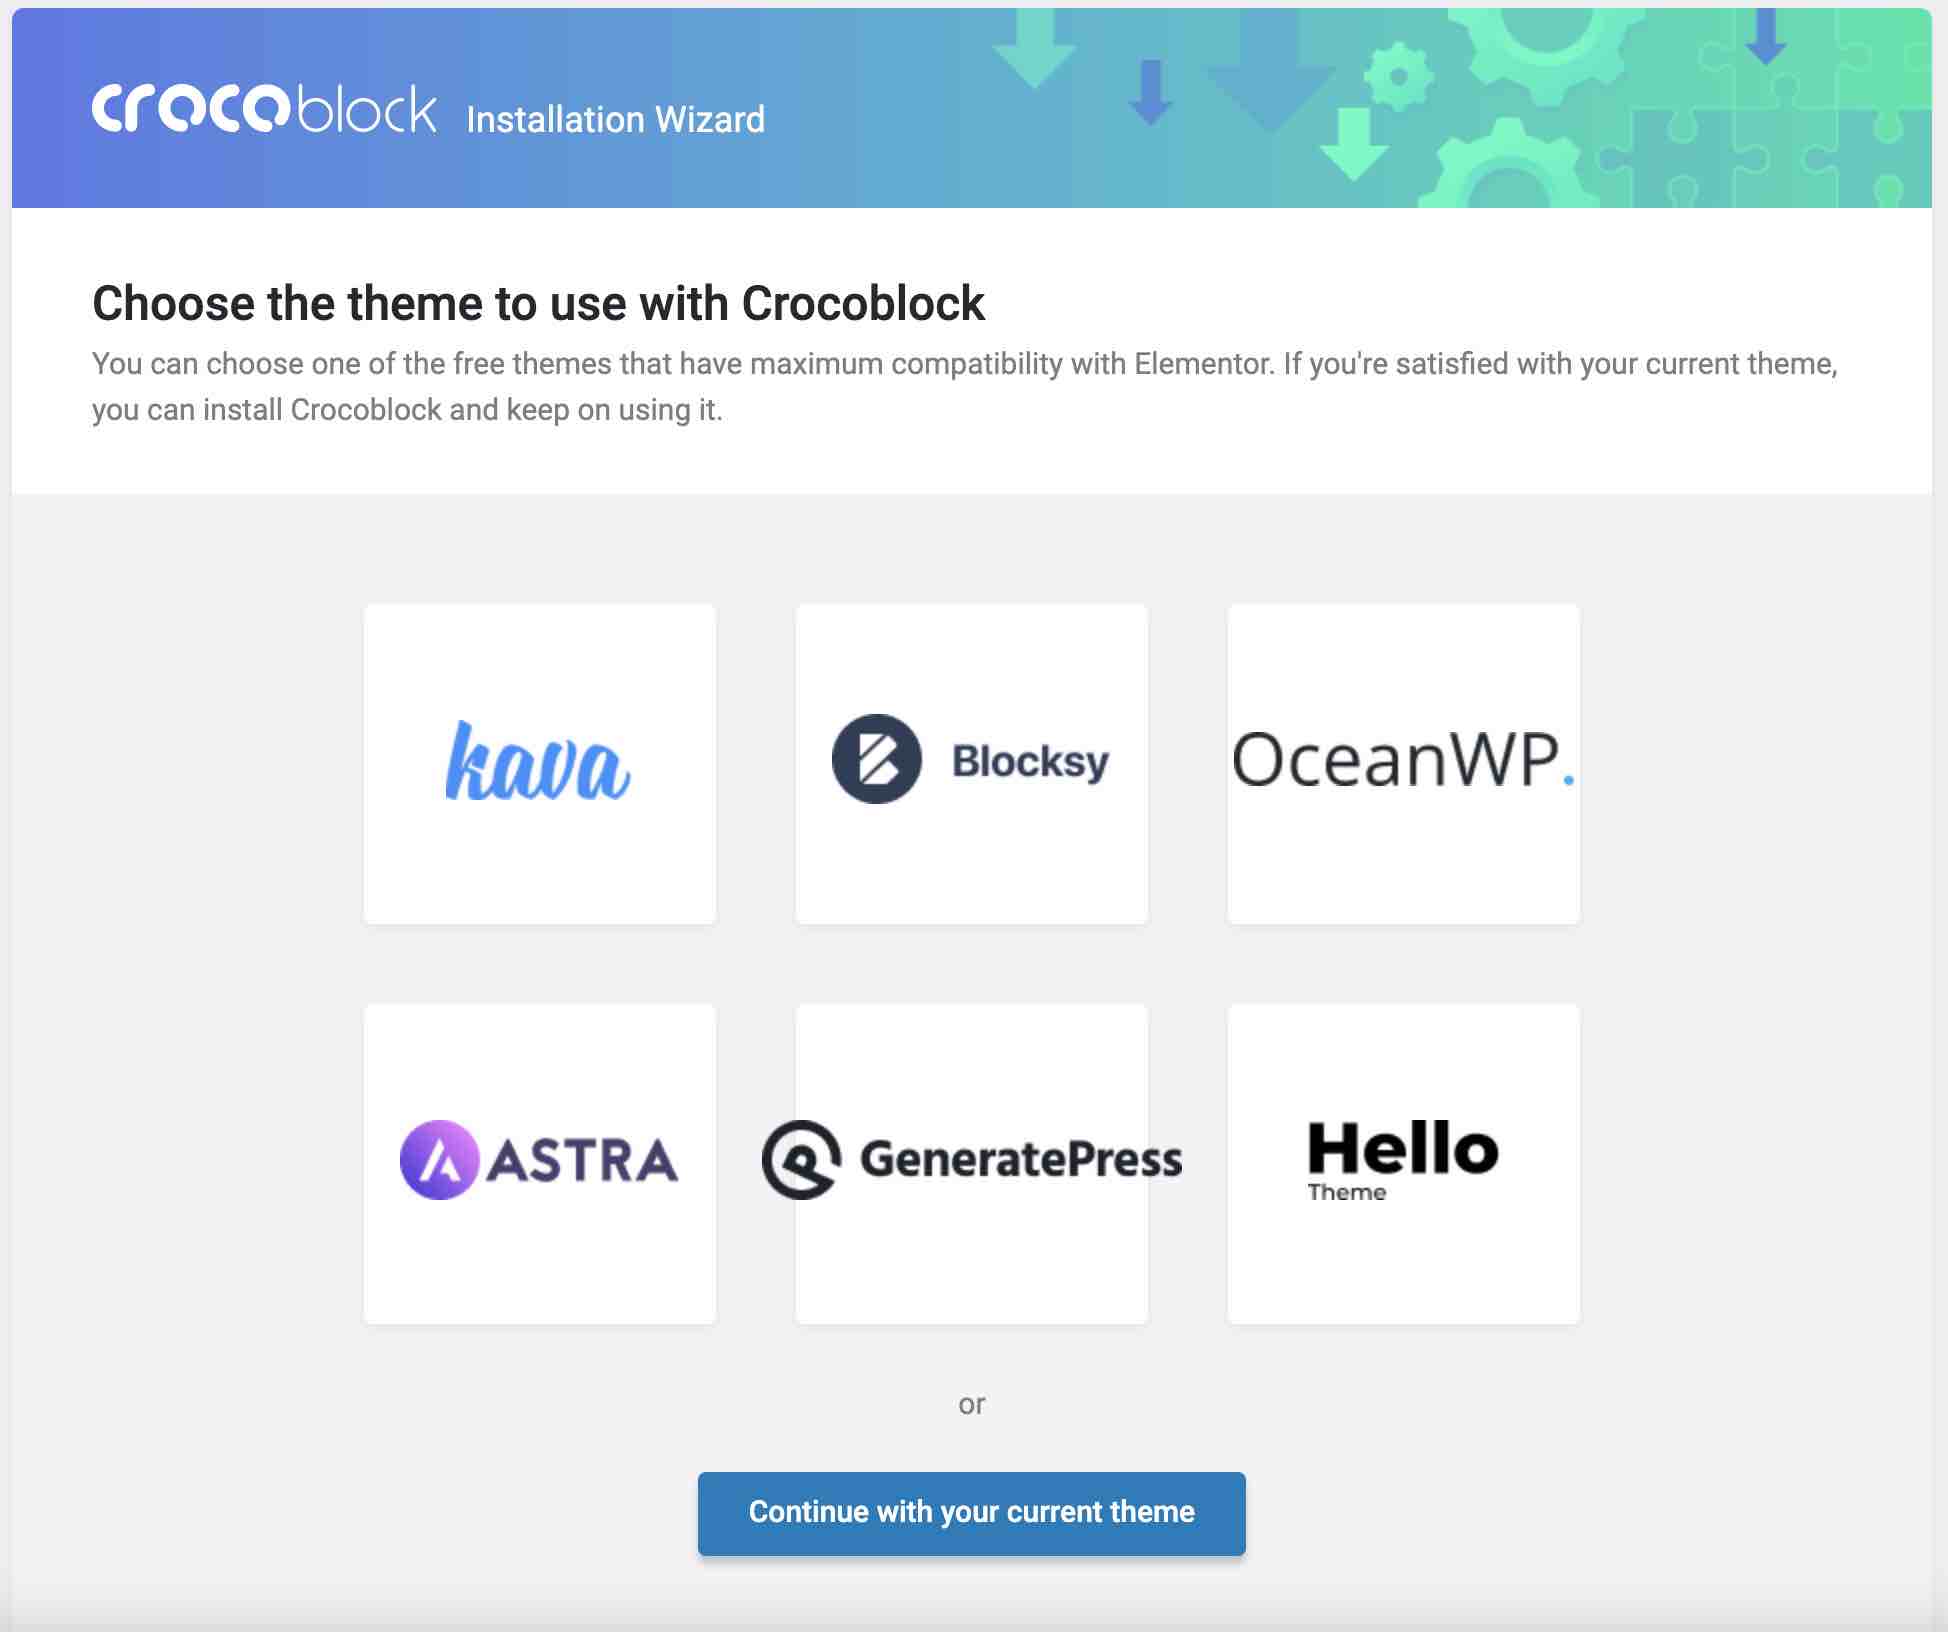 Themes recommended by Crocoblock.